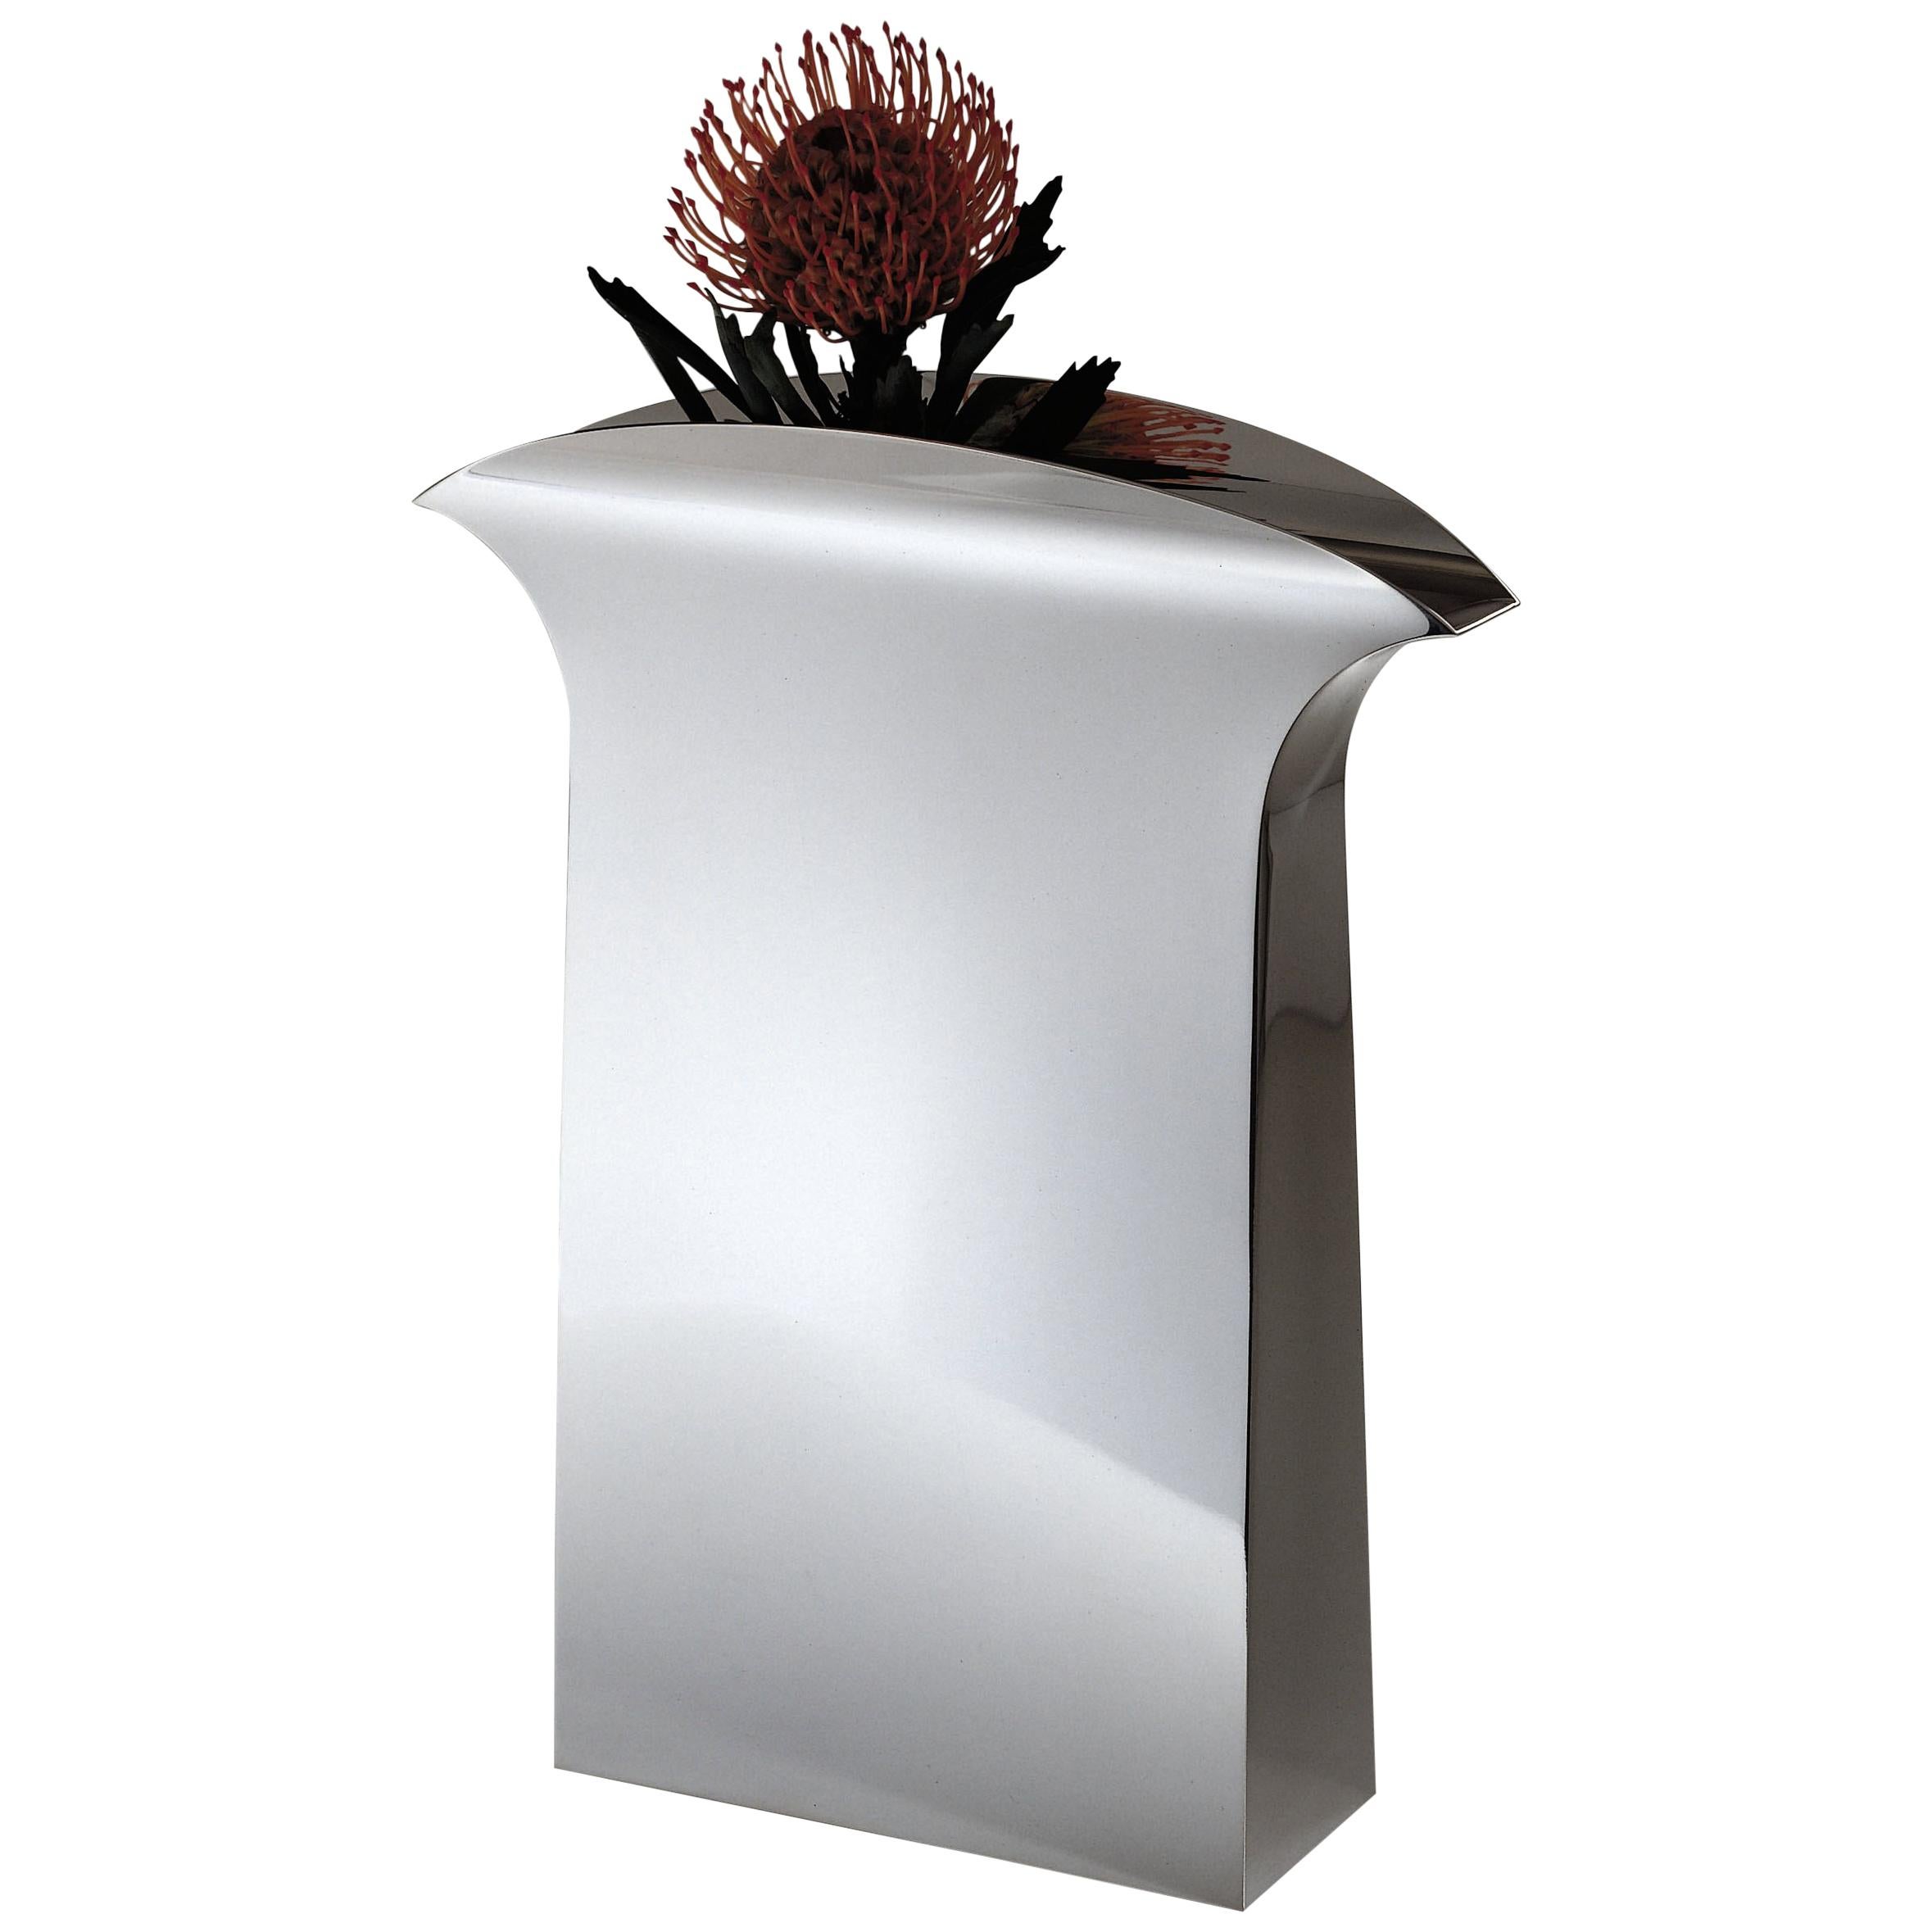 Italian Handmade Modern Silver Plated Vase "Papeete" by G. Malimpensa for Mesa For Sale